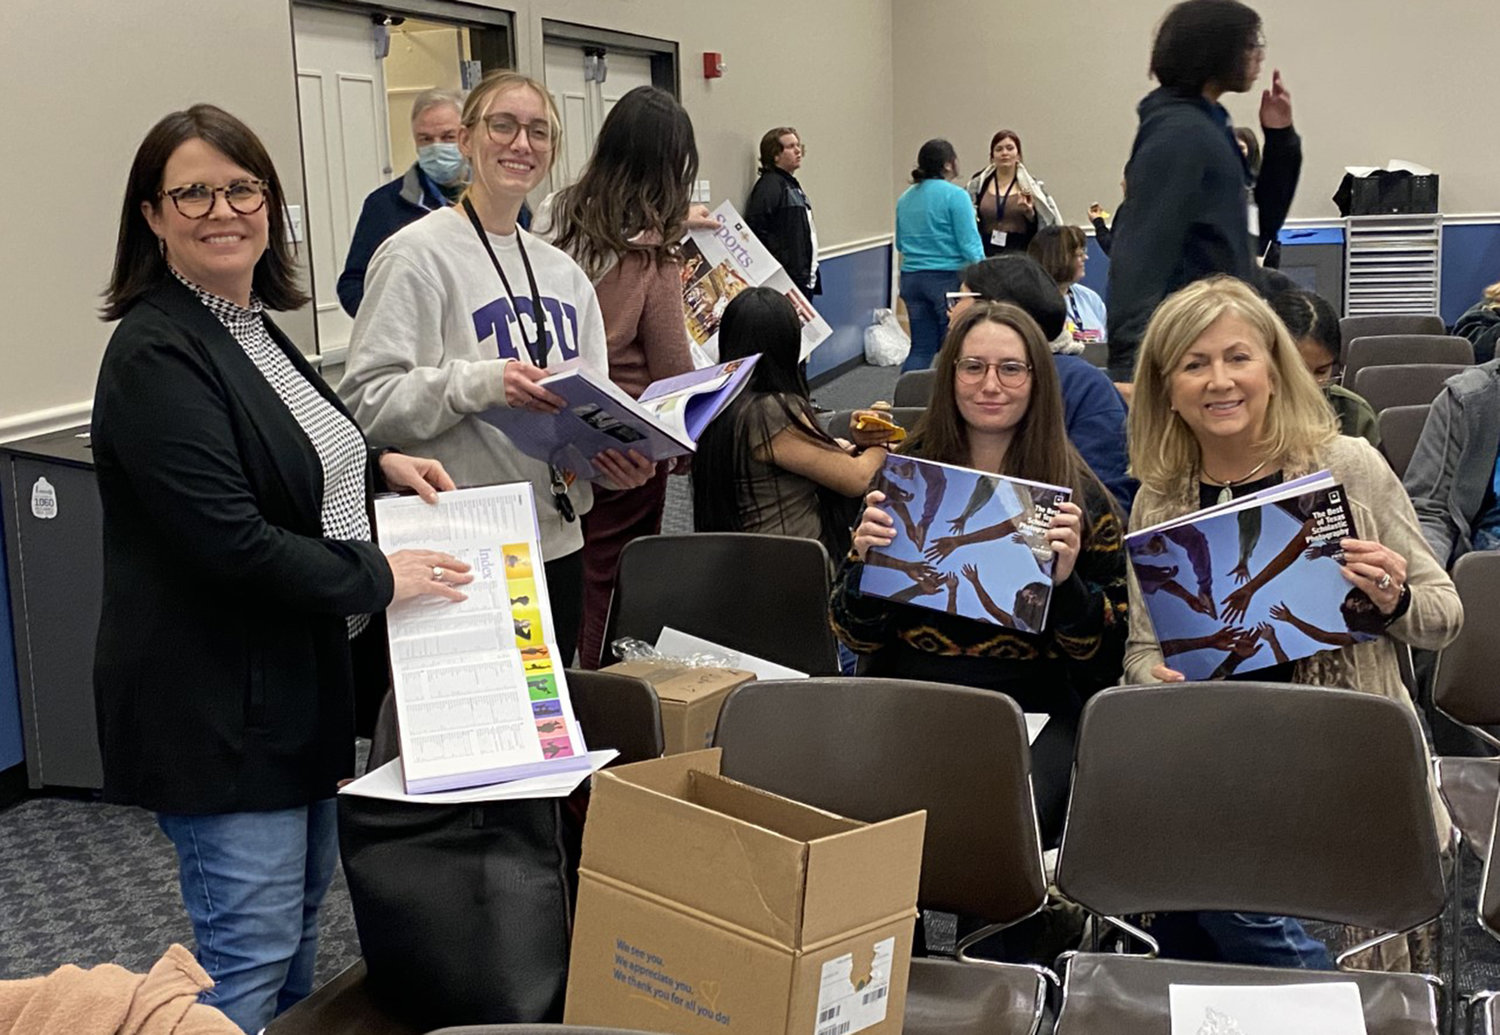 Aledo ISD instructor Emily Arnold, AHS seniors Kaylee Halfmann and Taylor Tiberg, and instructor Linda Greenwood look over volume five of The Best of Texas Scholastic Photography.